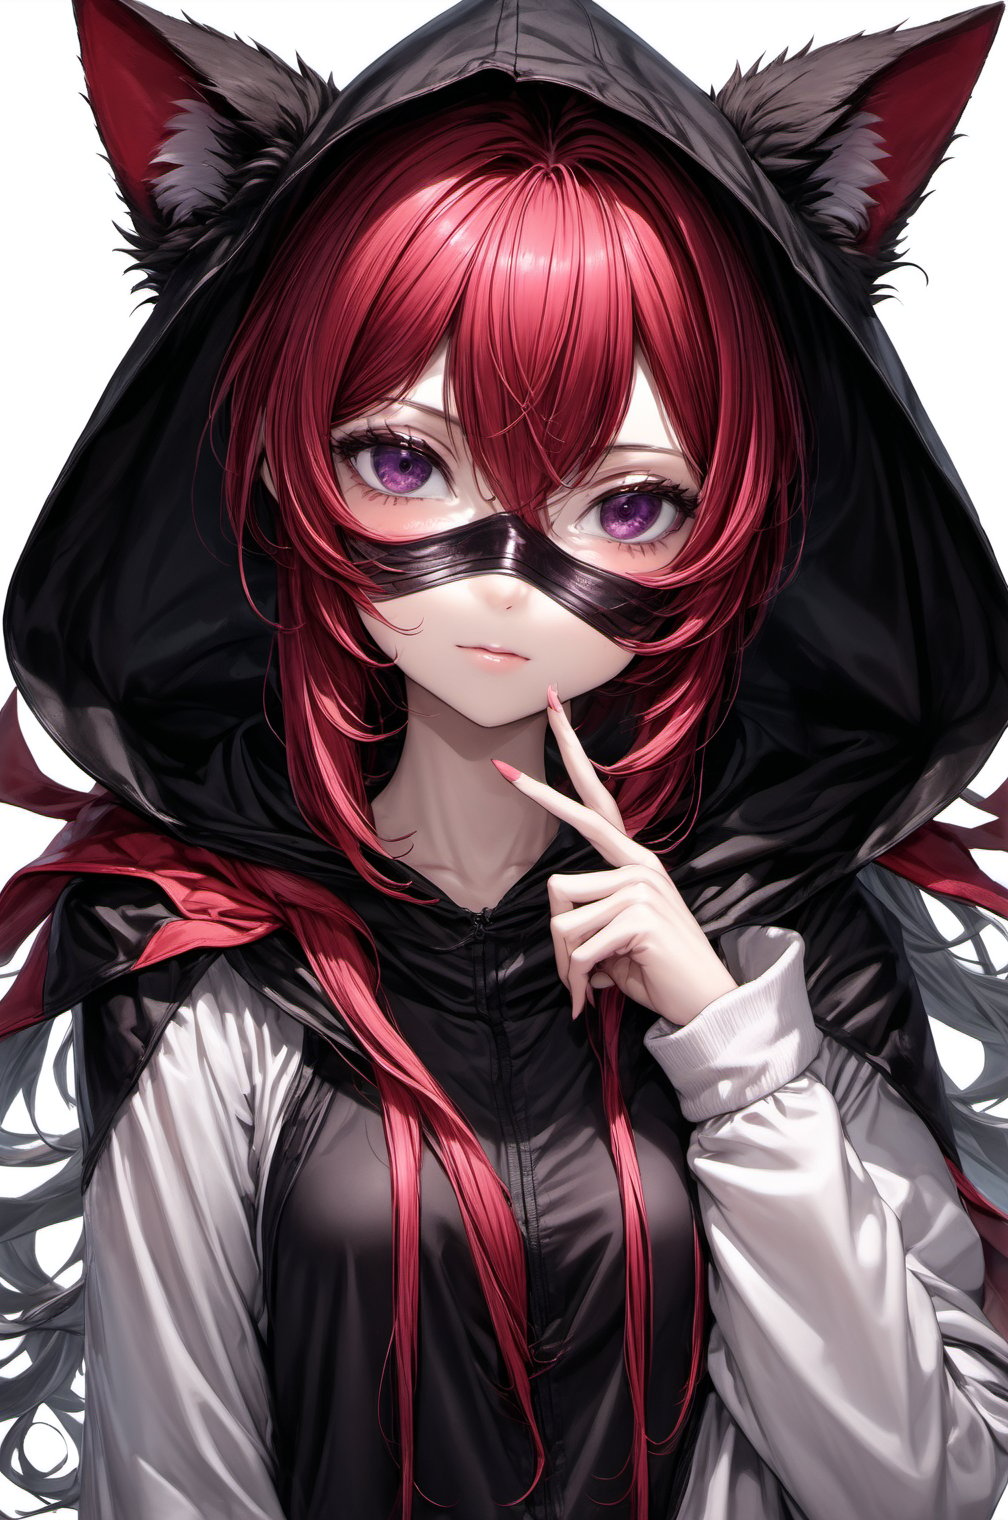 blood, monster version, detailed eyes, cat eyes, fire eyes, purple eyes, flat face mask, large face mask, black face mask, face mask with big smile :}, face mask with large fangs, teeth coming out of the face mask, blood red sweatshirt, hood covering head, hood with cat ears, face of 18 year old woman, dark background, blood red hair, pose of head tilted to the right looking forward, pose pointing finger at chin, short neck, shading,masterpiece,best quality,very aesthetic, ,score_9,gag,round, score_8_up ,Expressiveh,naked bandage,ani_booster, score_7_up,Eyes,score_6_up,Visual_Illustration, score_5_up